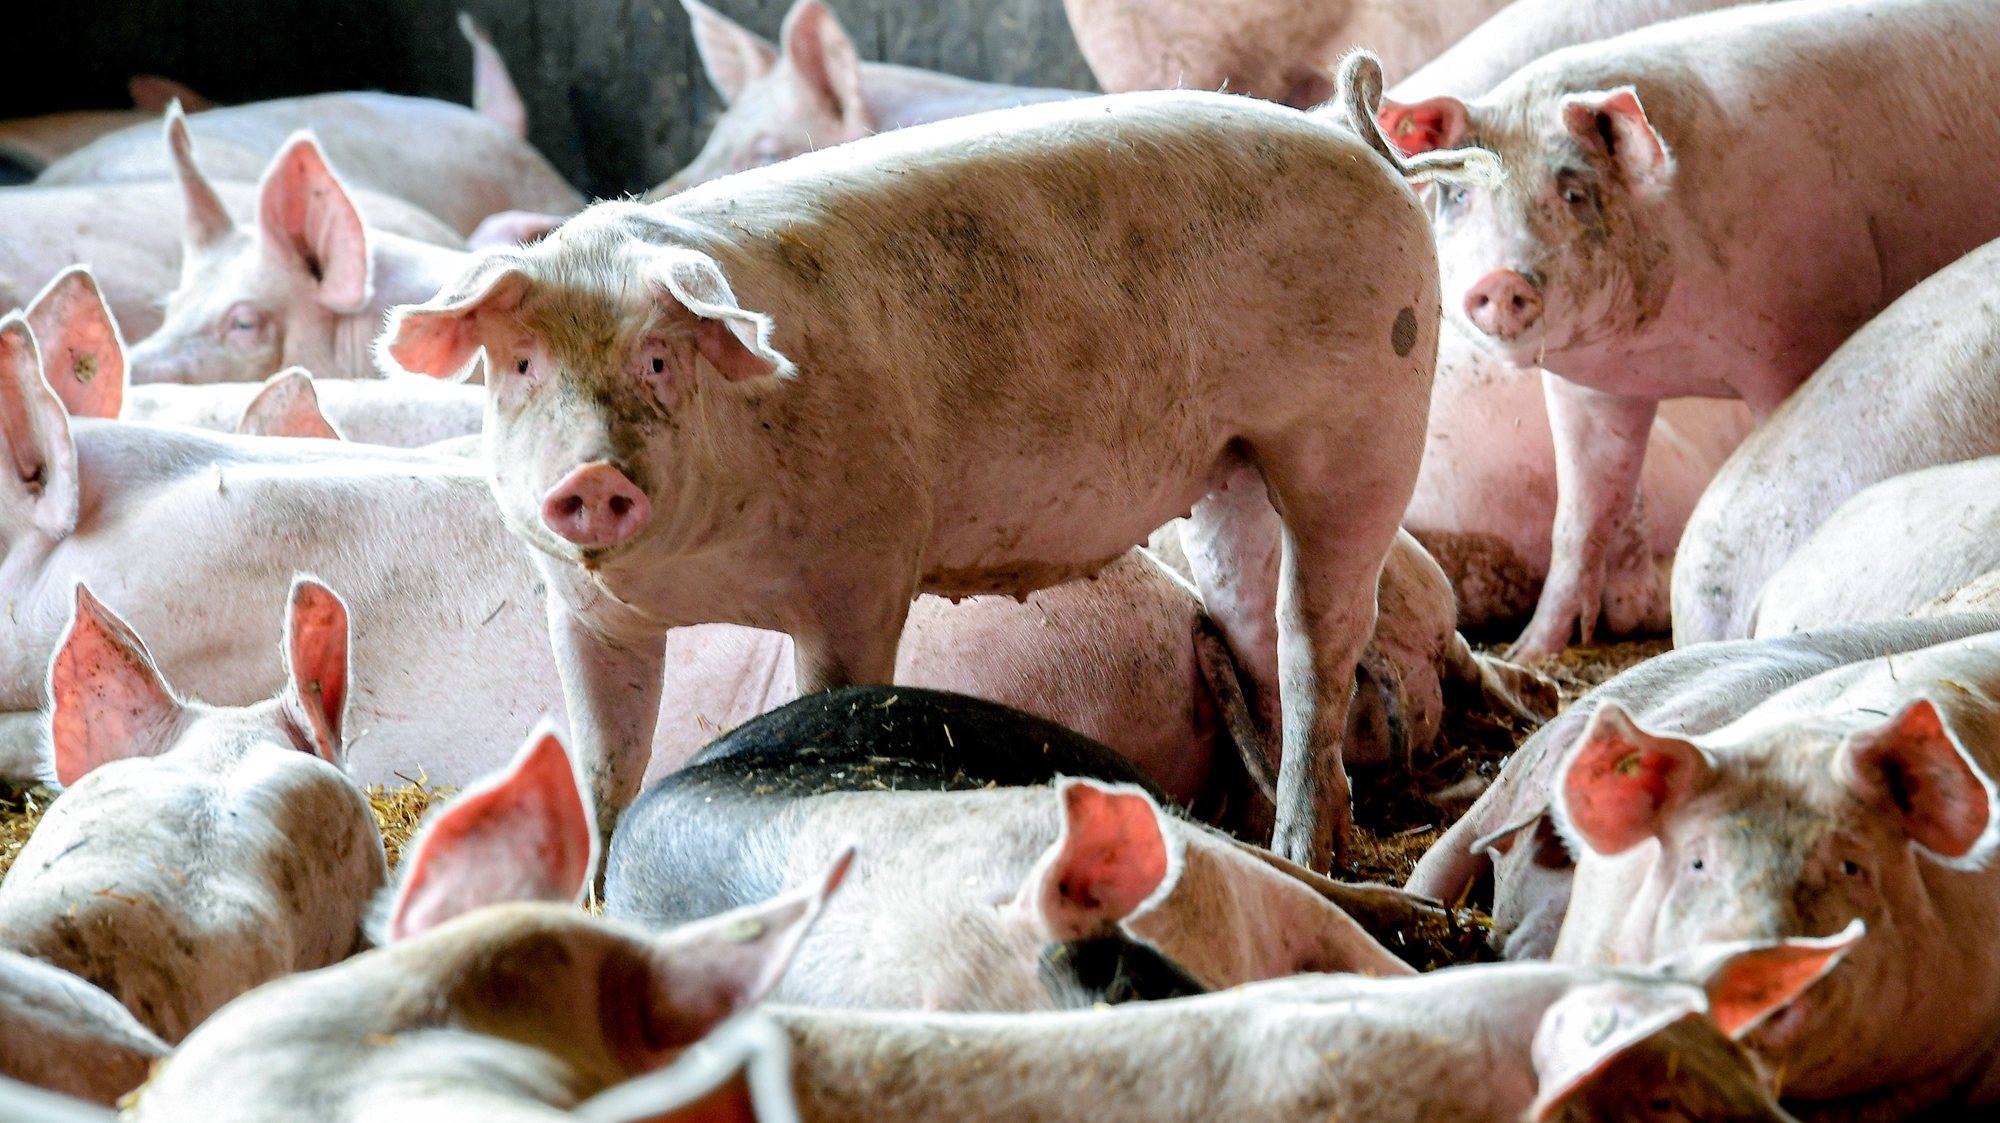 epa08663574 Pigs stand and lie in air-conditioned outdoor stables with straw bedding at a pig fattening farm in Brueggen, Germany, 19 August 2019 (reissued 12 September 2020). China on 12 September 2020 said it had banned all imports of German pork meat following the discovery of first case of African Swine Fever in Germany. The highly contagious disease is harmless to humans. China is the biggest importer of German pork meat.  EPA/SASCHA STEINBACH *** Local Caption *** 55404102